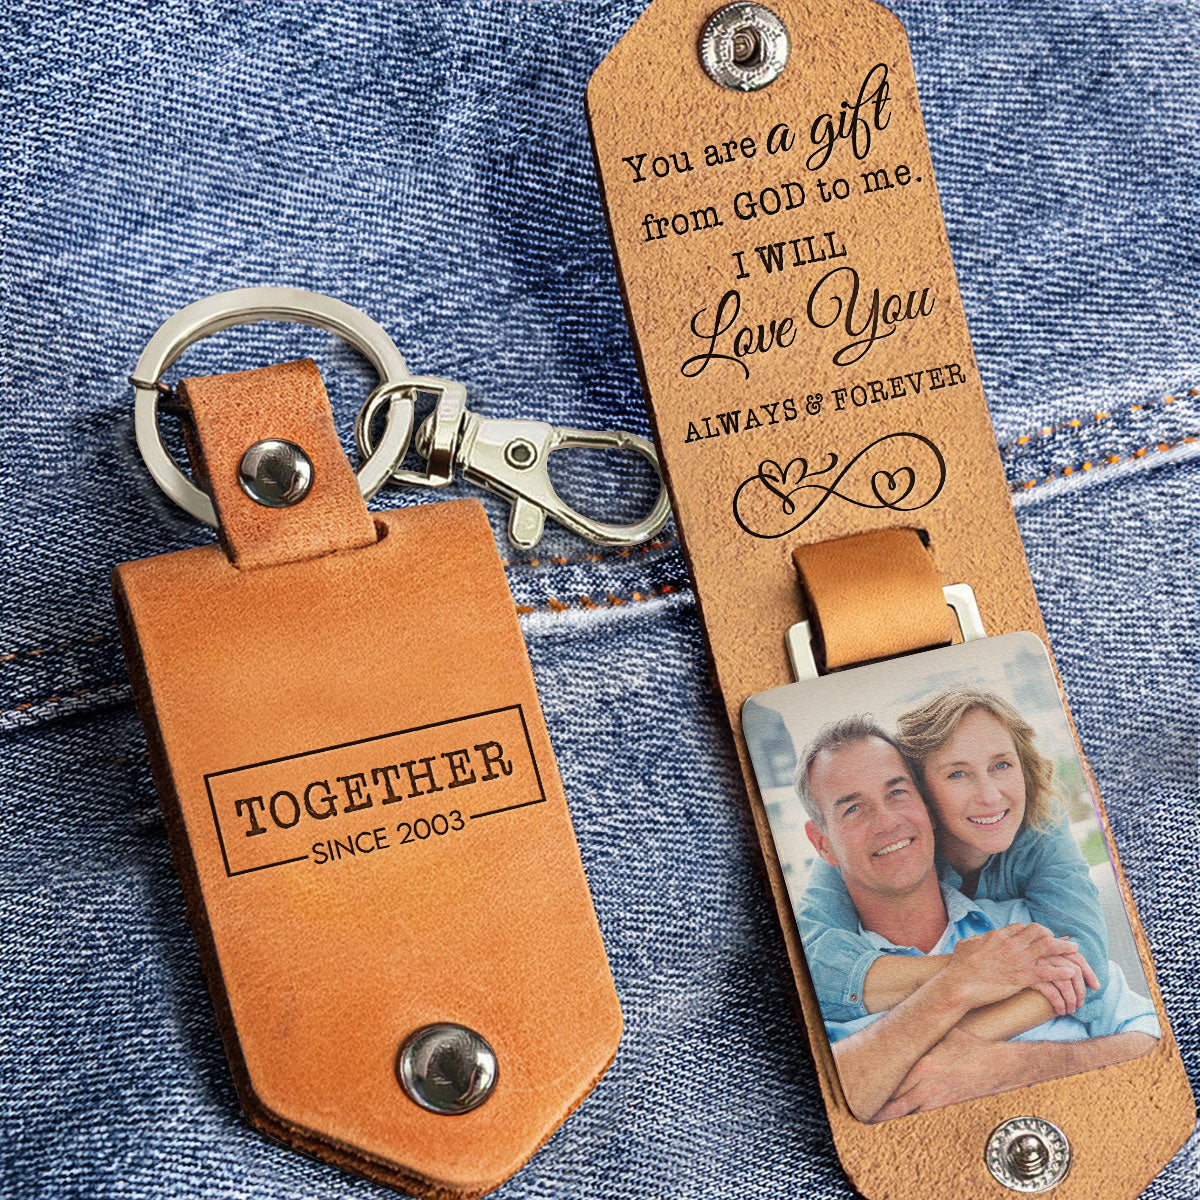 I Love You Always And Forever - Personalized Leather Photo Keychain